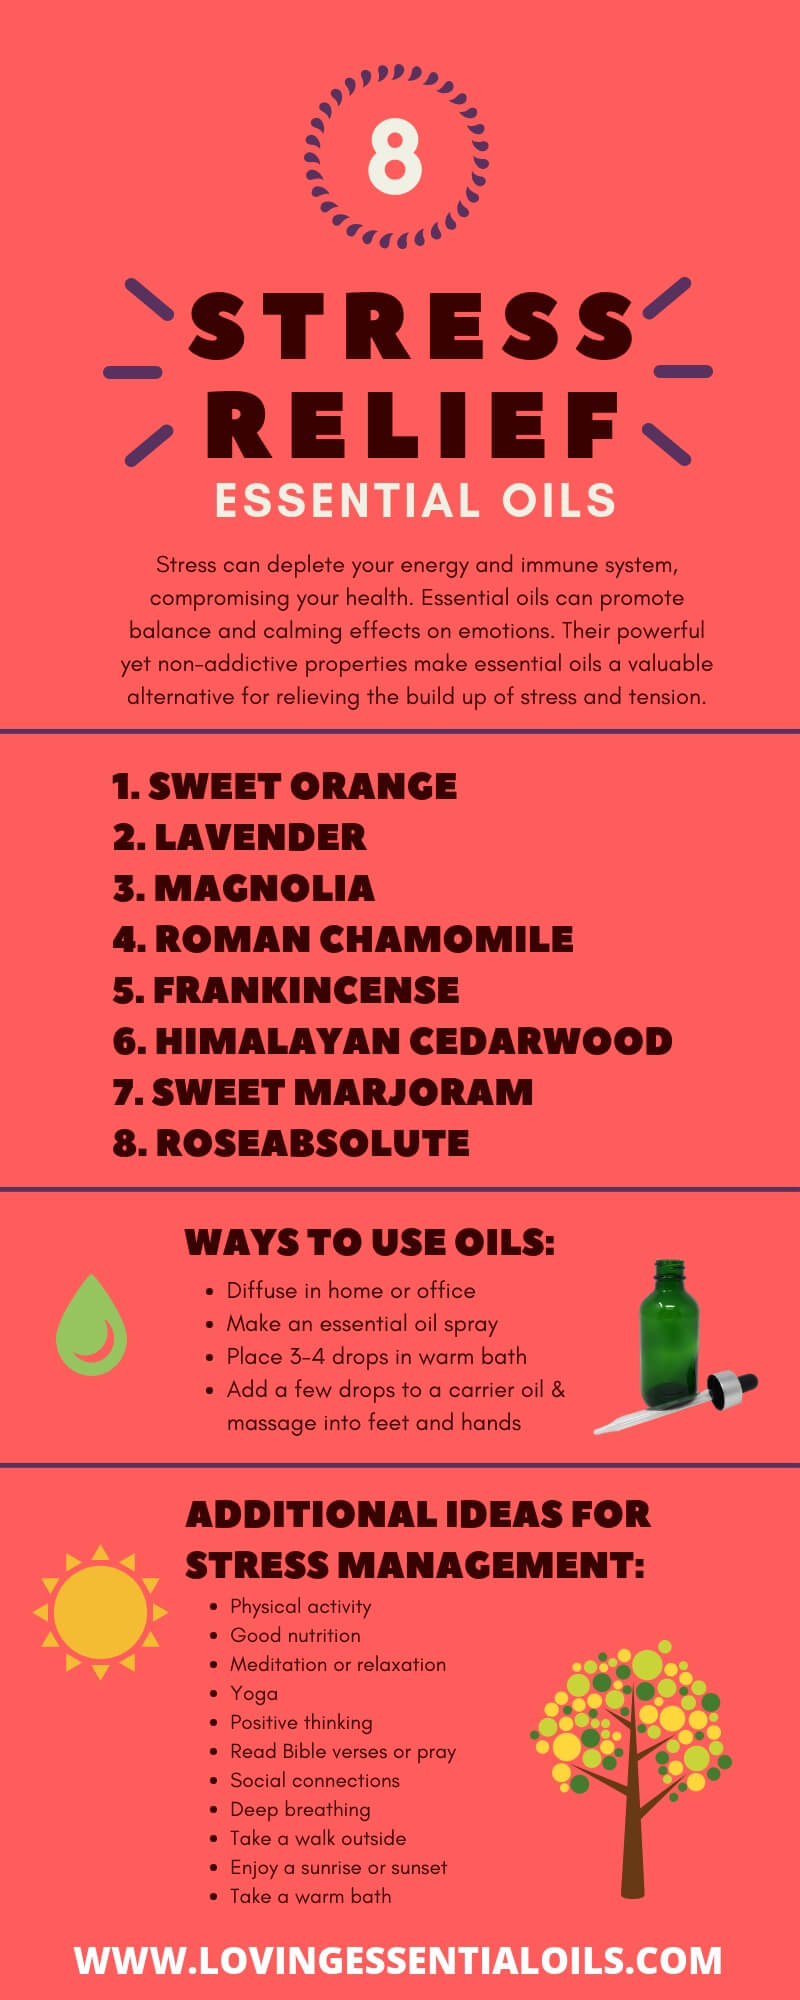 How to Use Essential Oil for Stress Relief by Loving Essential Oils